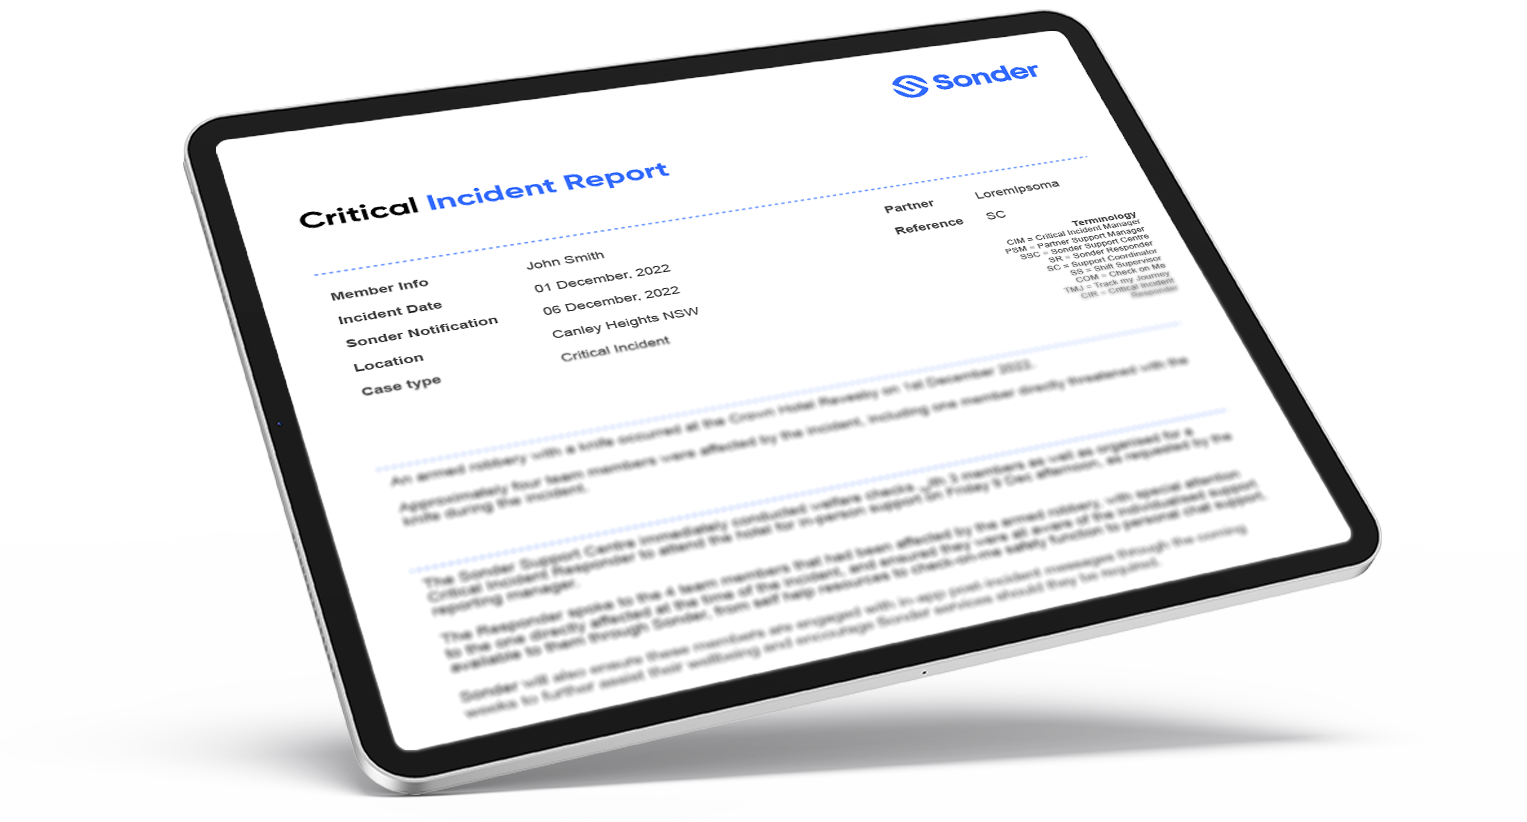 Sonder Critical incident reporting Get immediate updates on incidents and issues so you can understand what’s going on with your team, where ever, when ever.